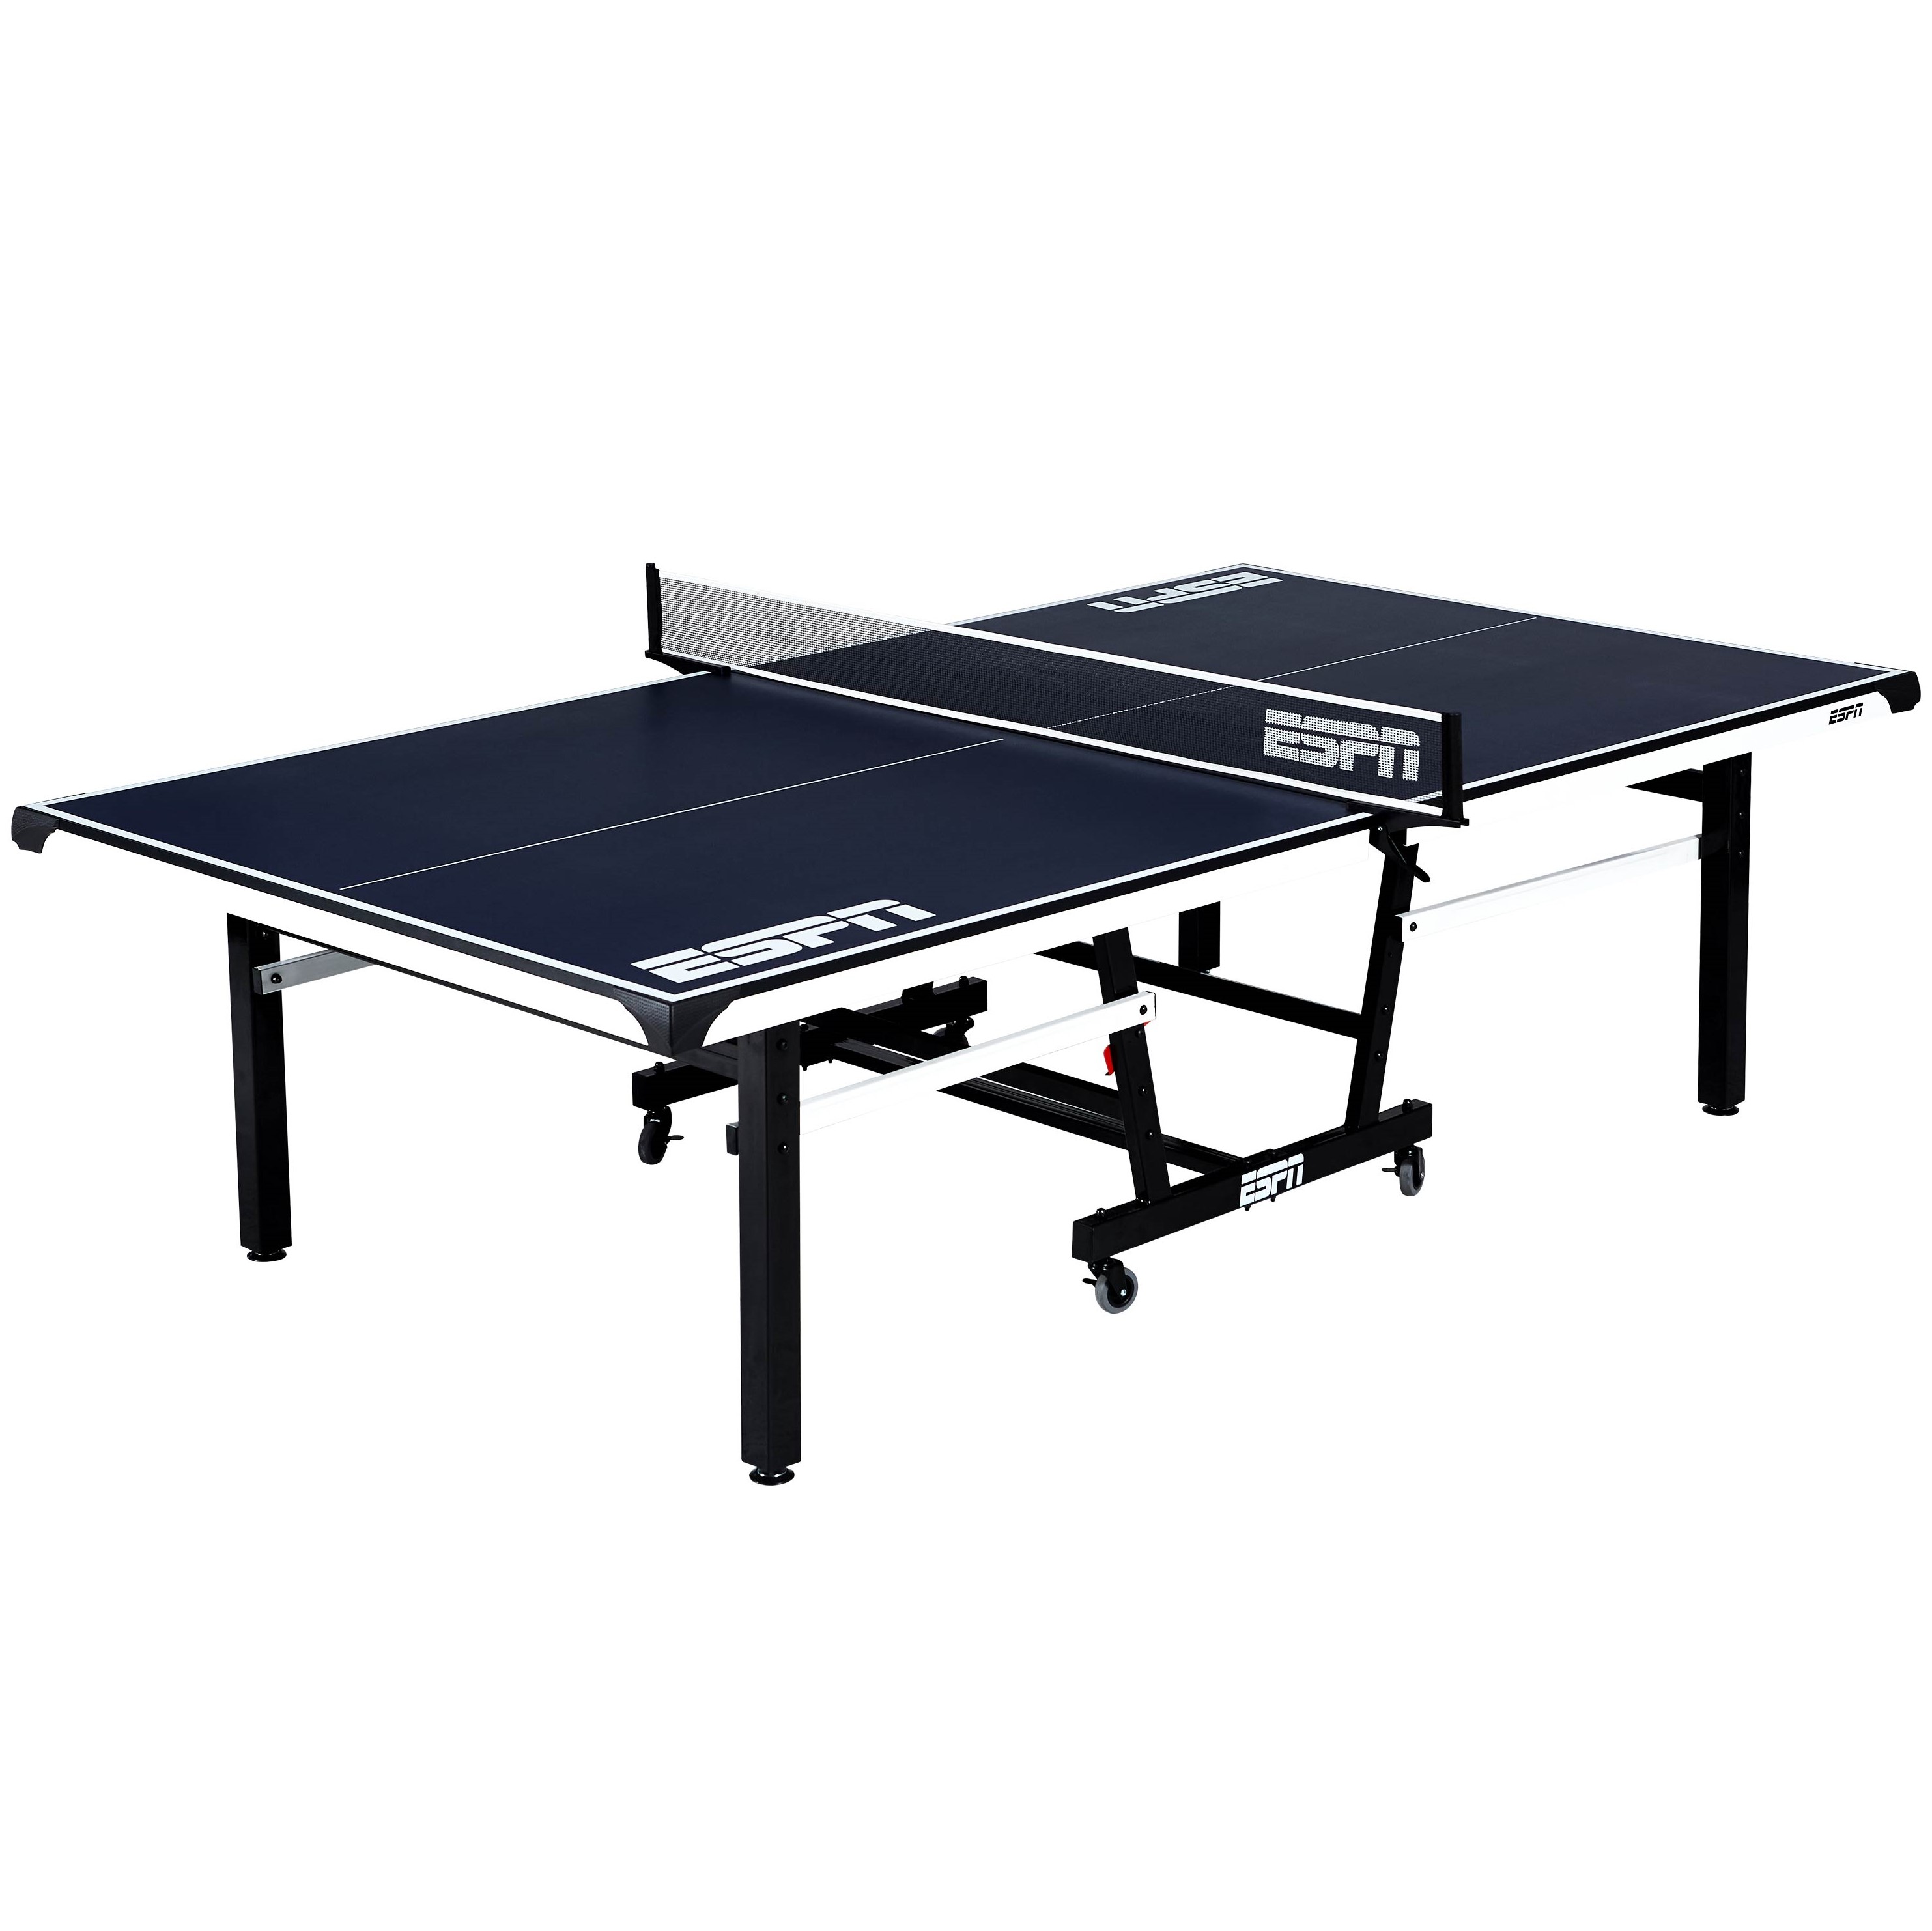 ESPN Official Size 18mm 2 Piece Table Tennis Table with Table Cover, #1 Indoor Model - image 1 of 13